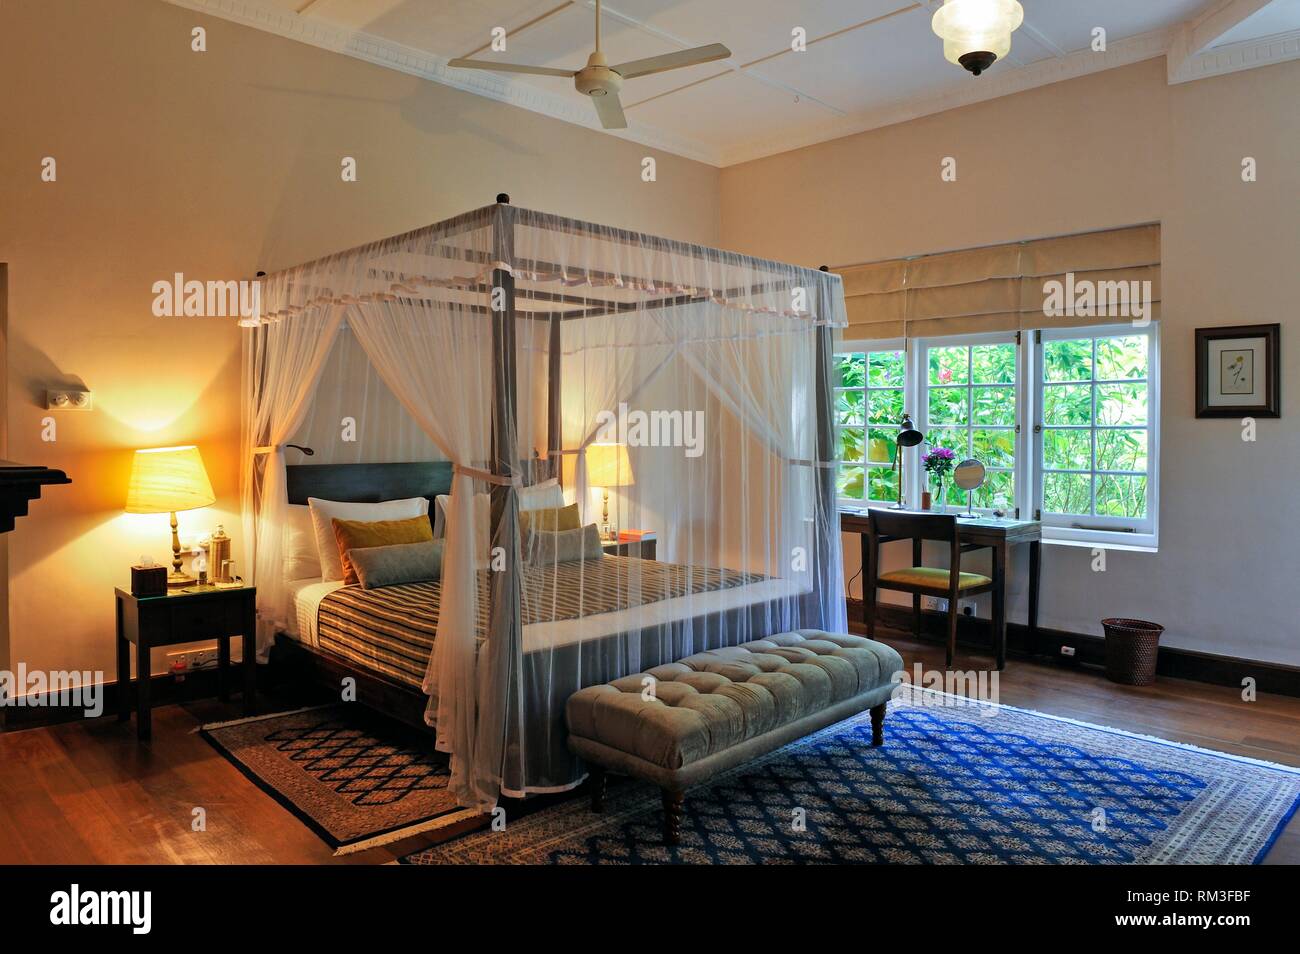 bedroom of the Summerville Bungalow of the luxury Ceylon Tea Trails resort, Sri Lanka, Indian subcontinent, South Asia. Stock Photo